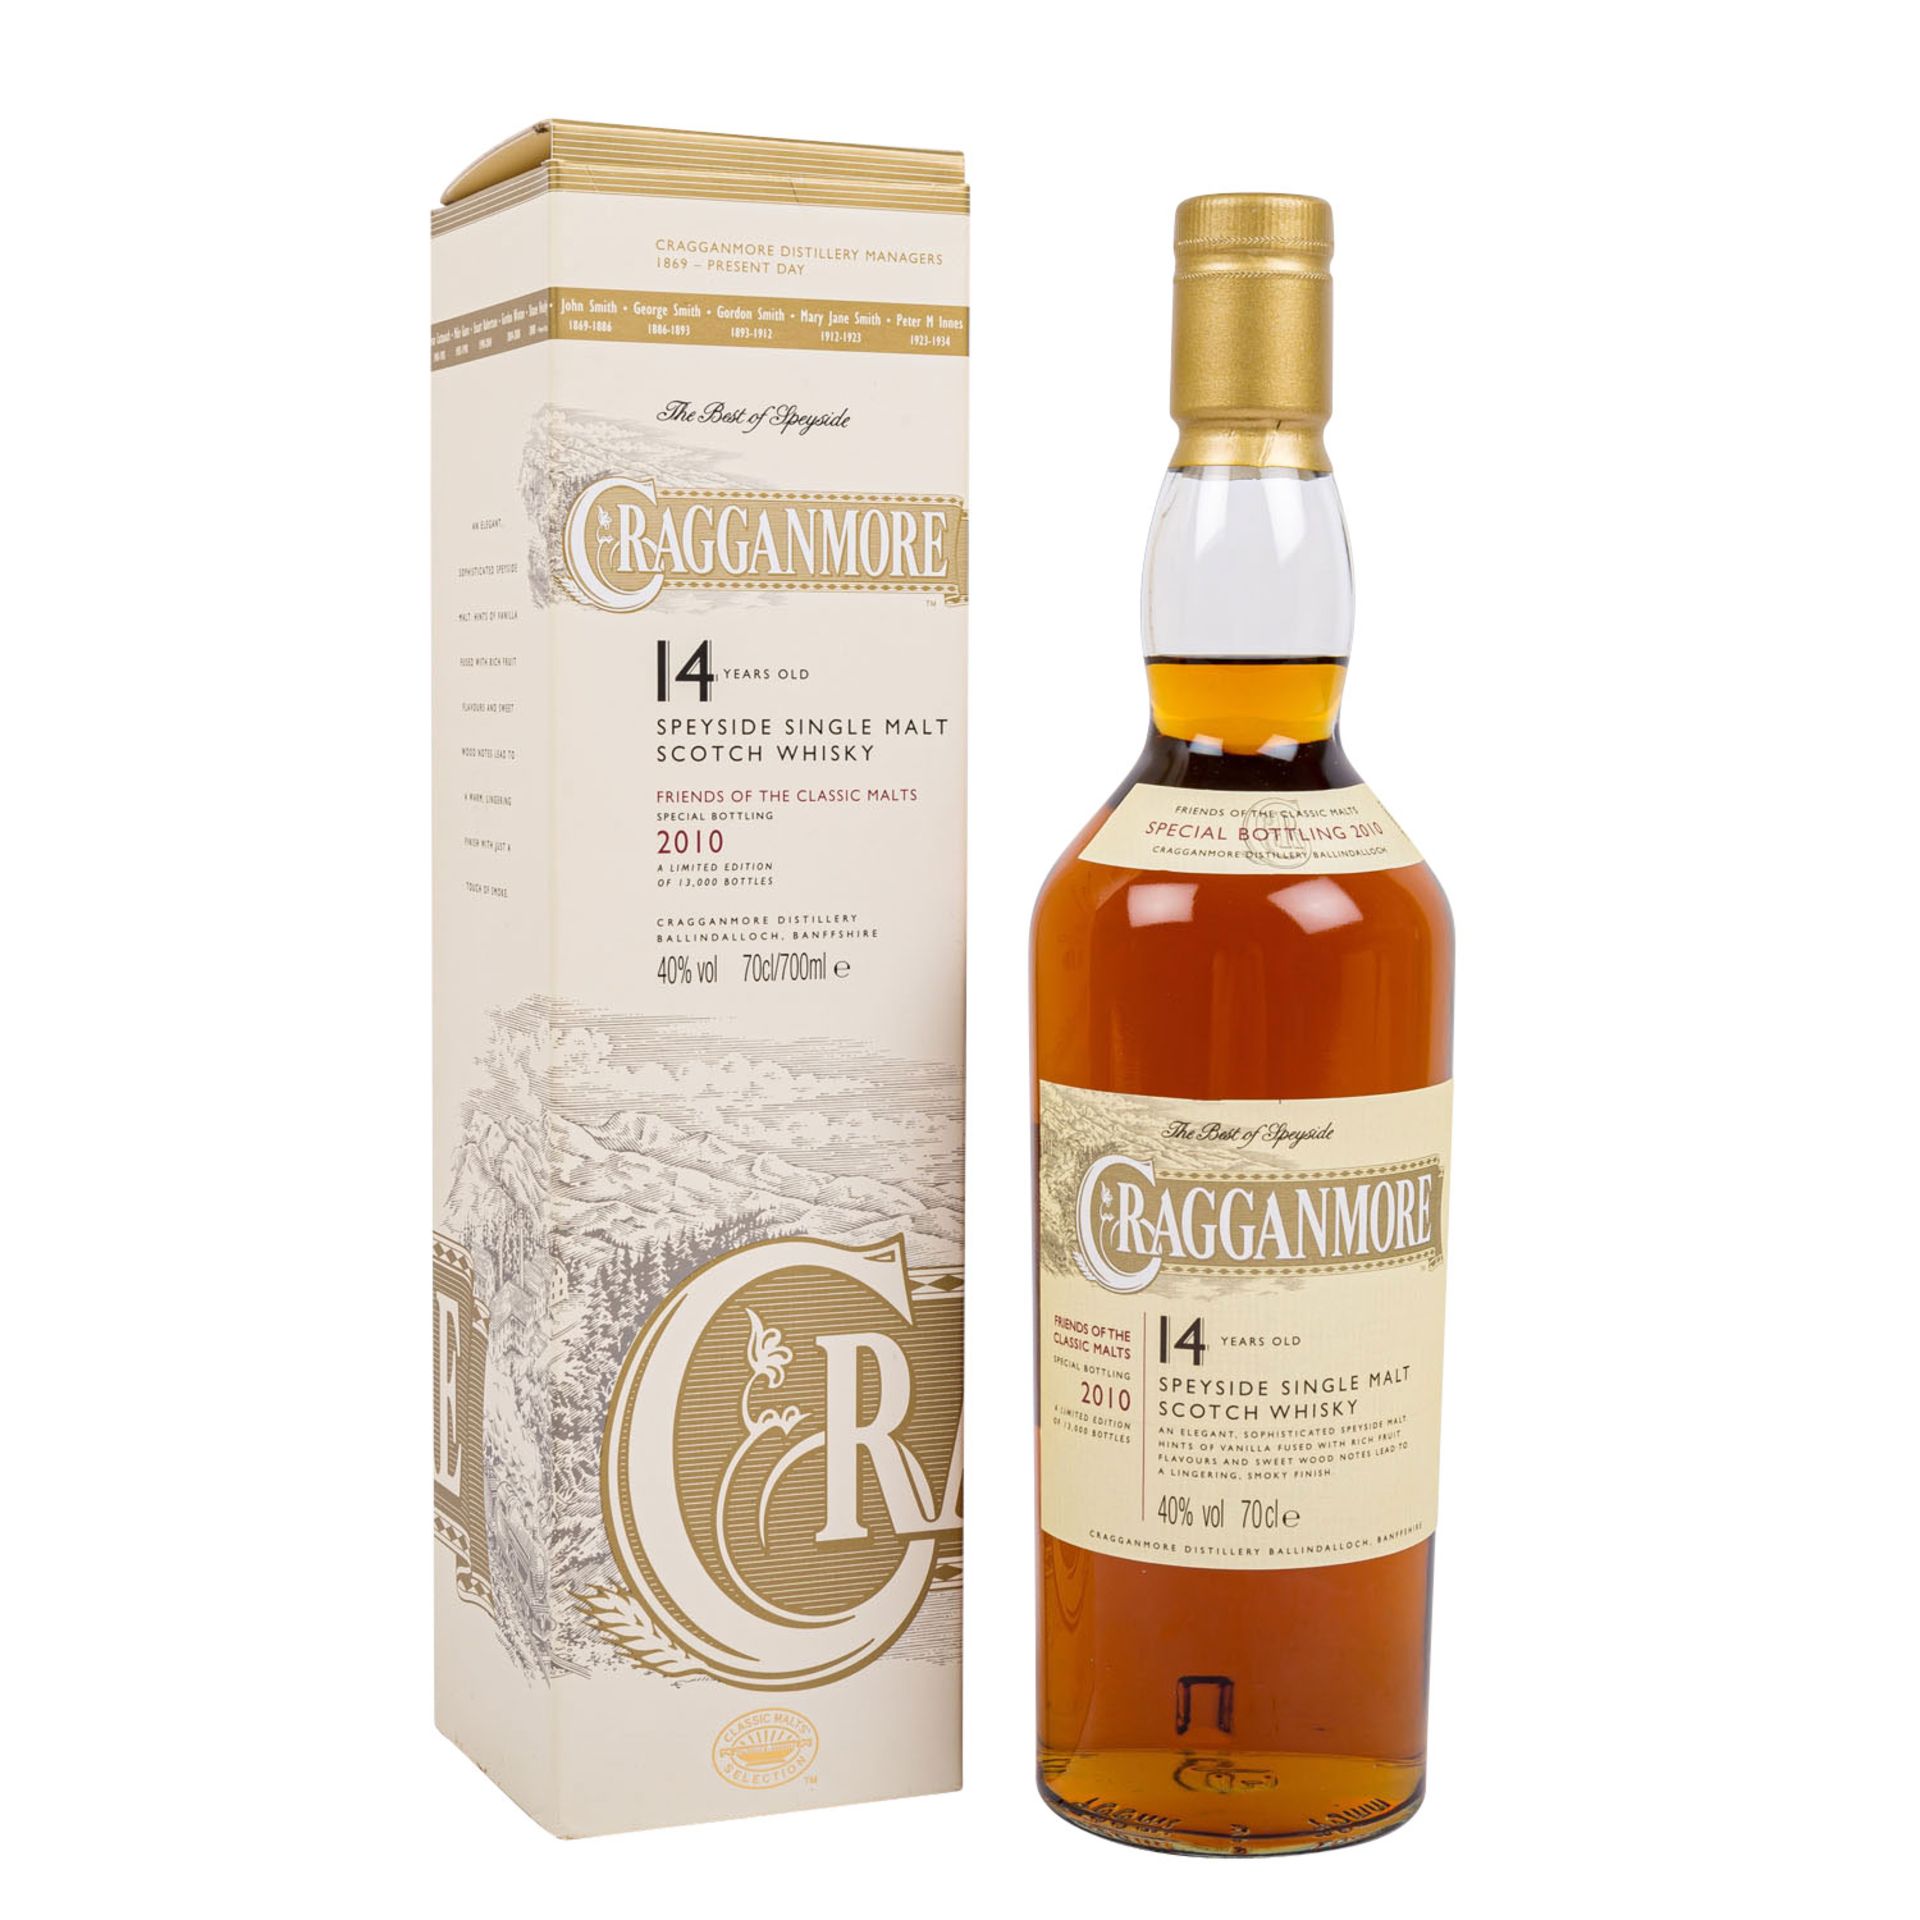 CRAGGANMORE Speyside Single Malt Scotch Whisky "14 Years Old"